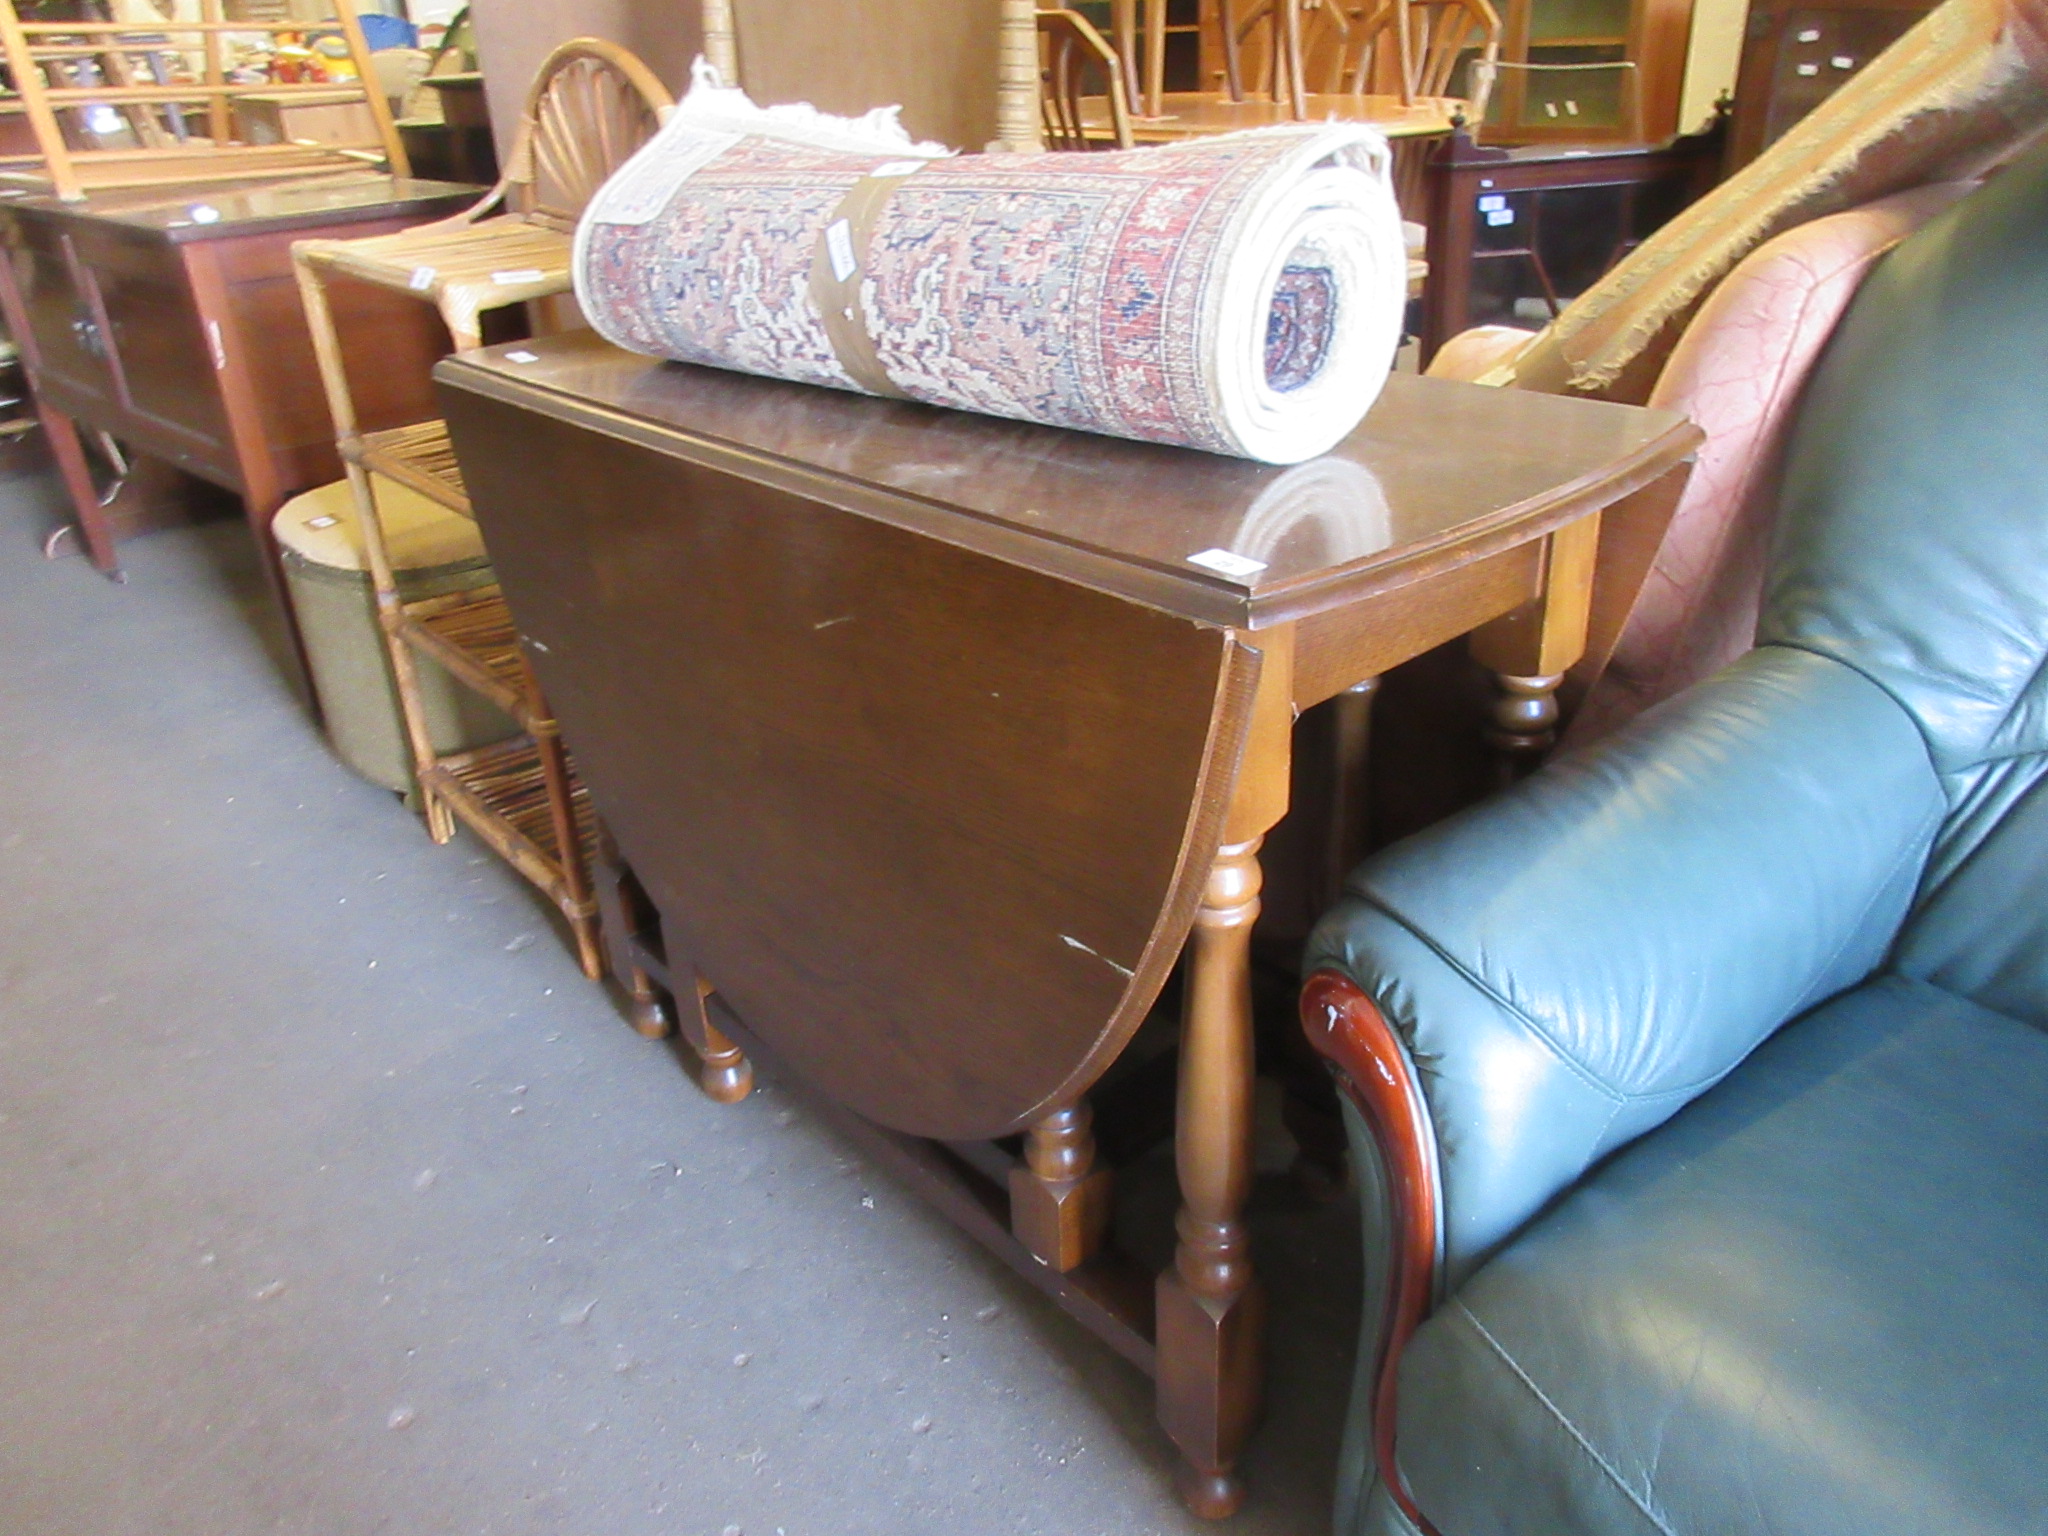 MID-20TH CENTURY DROP LEAF WOODEN TABLE